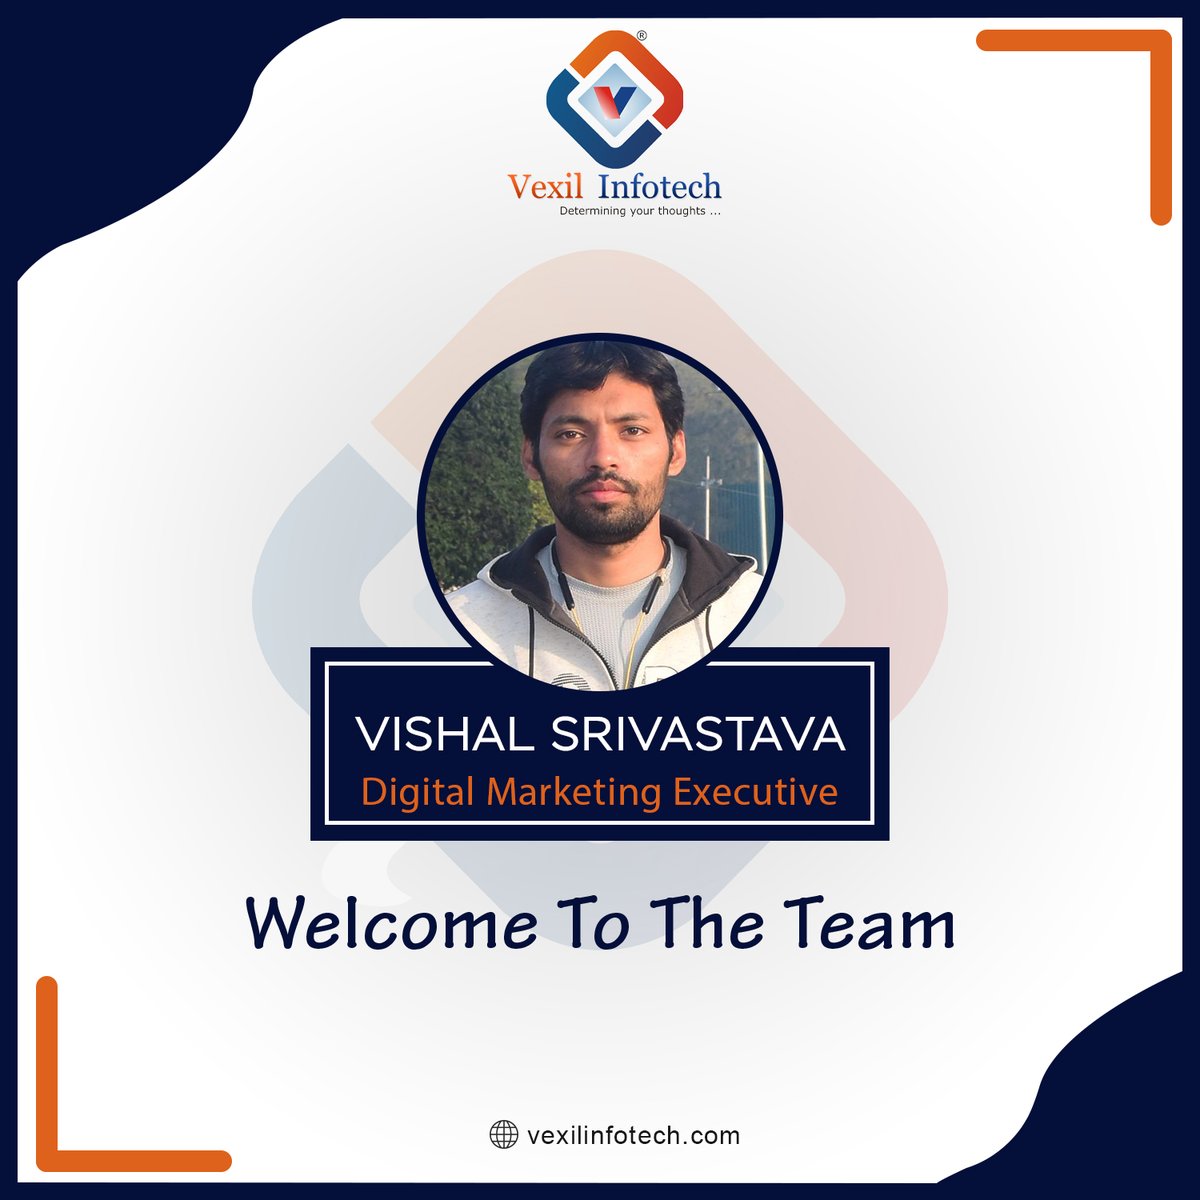 Thrilled to introduce Mr. Vishal as the newest member of our talented team!

We're excited to have you on board. Cheers to growth and new beginnings.

#WelcomeToTheTeam #NewBeginnings #NewJoining #newemployee #welcome #teamvexil #vexilinfotech